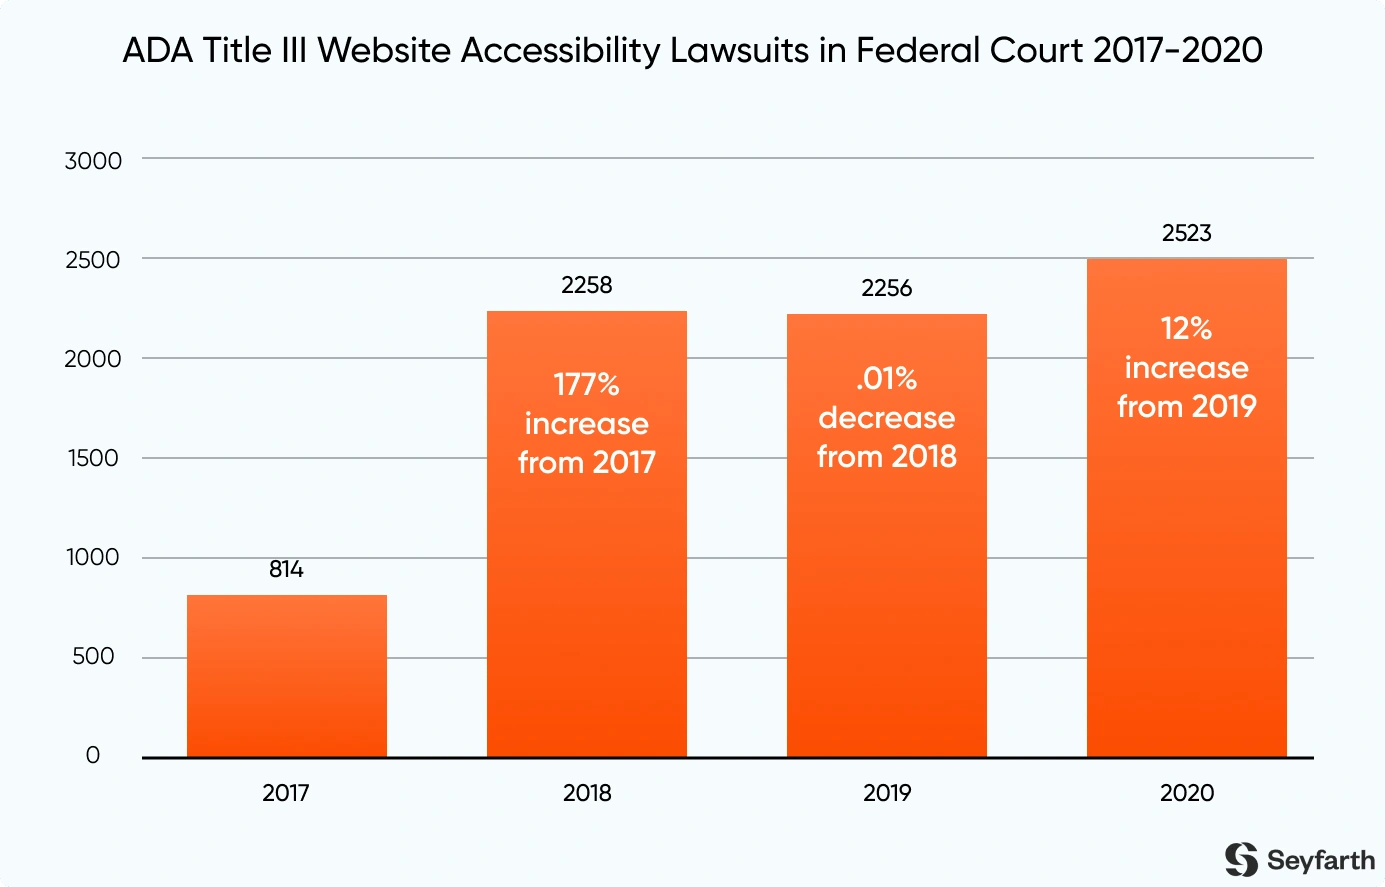 ADA Title III Web Accessibility Lawsuits in Federal Court